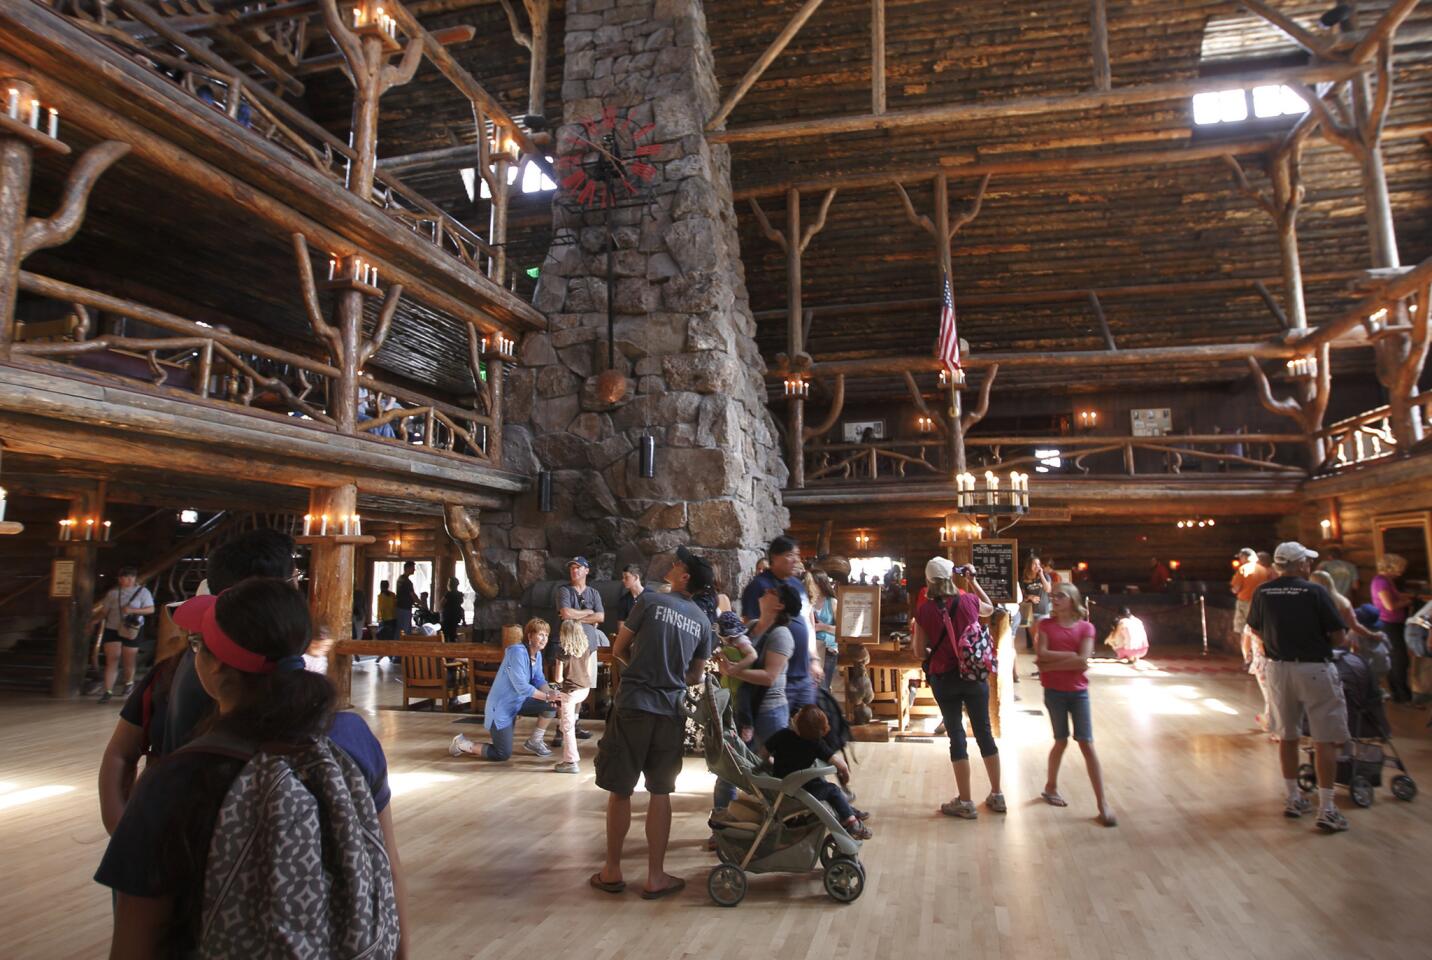 A towering fireplace and a handmade clock are a few of the features found in the lobby of The Old Faithful Inn, built from local logs and stone in 1904.